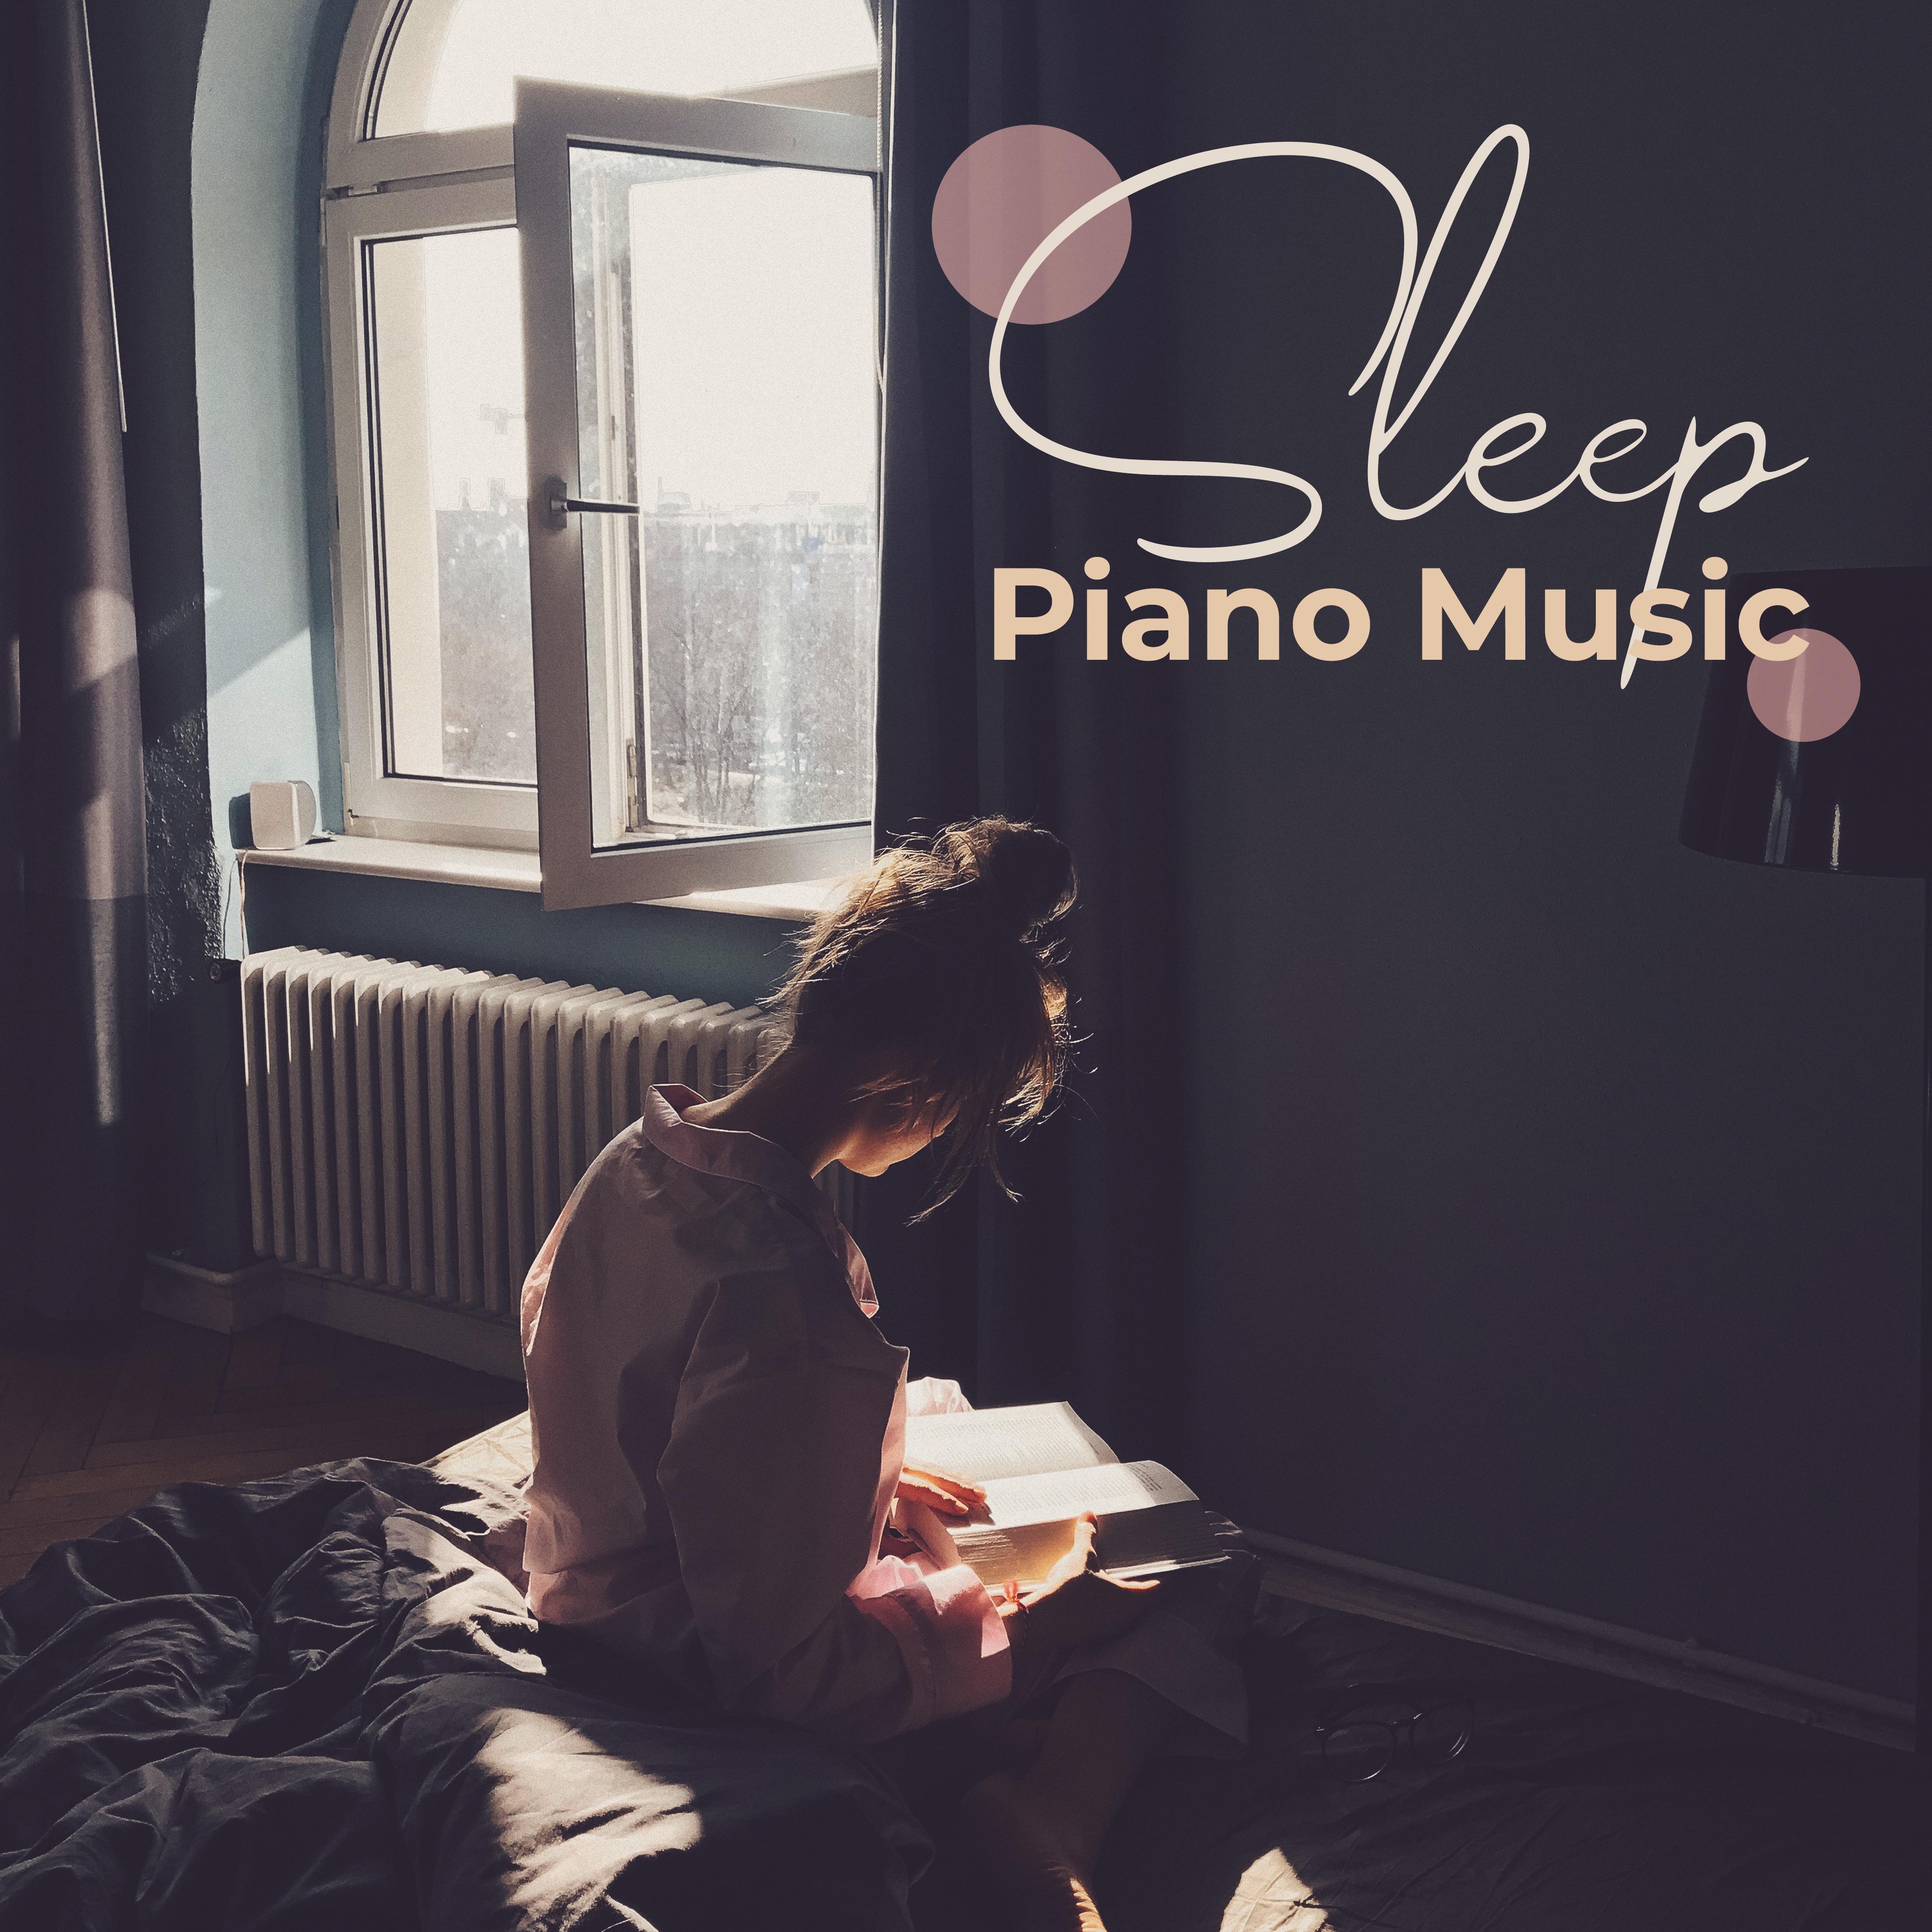 Sleep Piano Music: Classical Instrumental Music for Sleep, Piano Pieces for Insomnia & Sleepless Nights, Relaxing Lullabies for Goodnight, Bedtime Piano Melodies